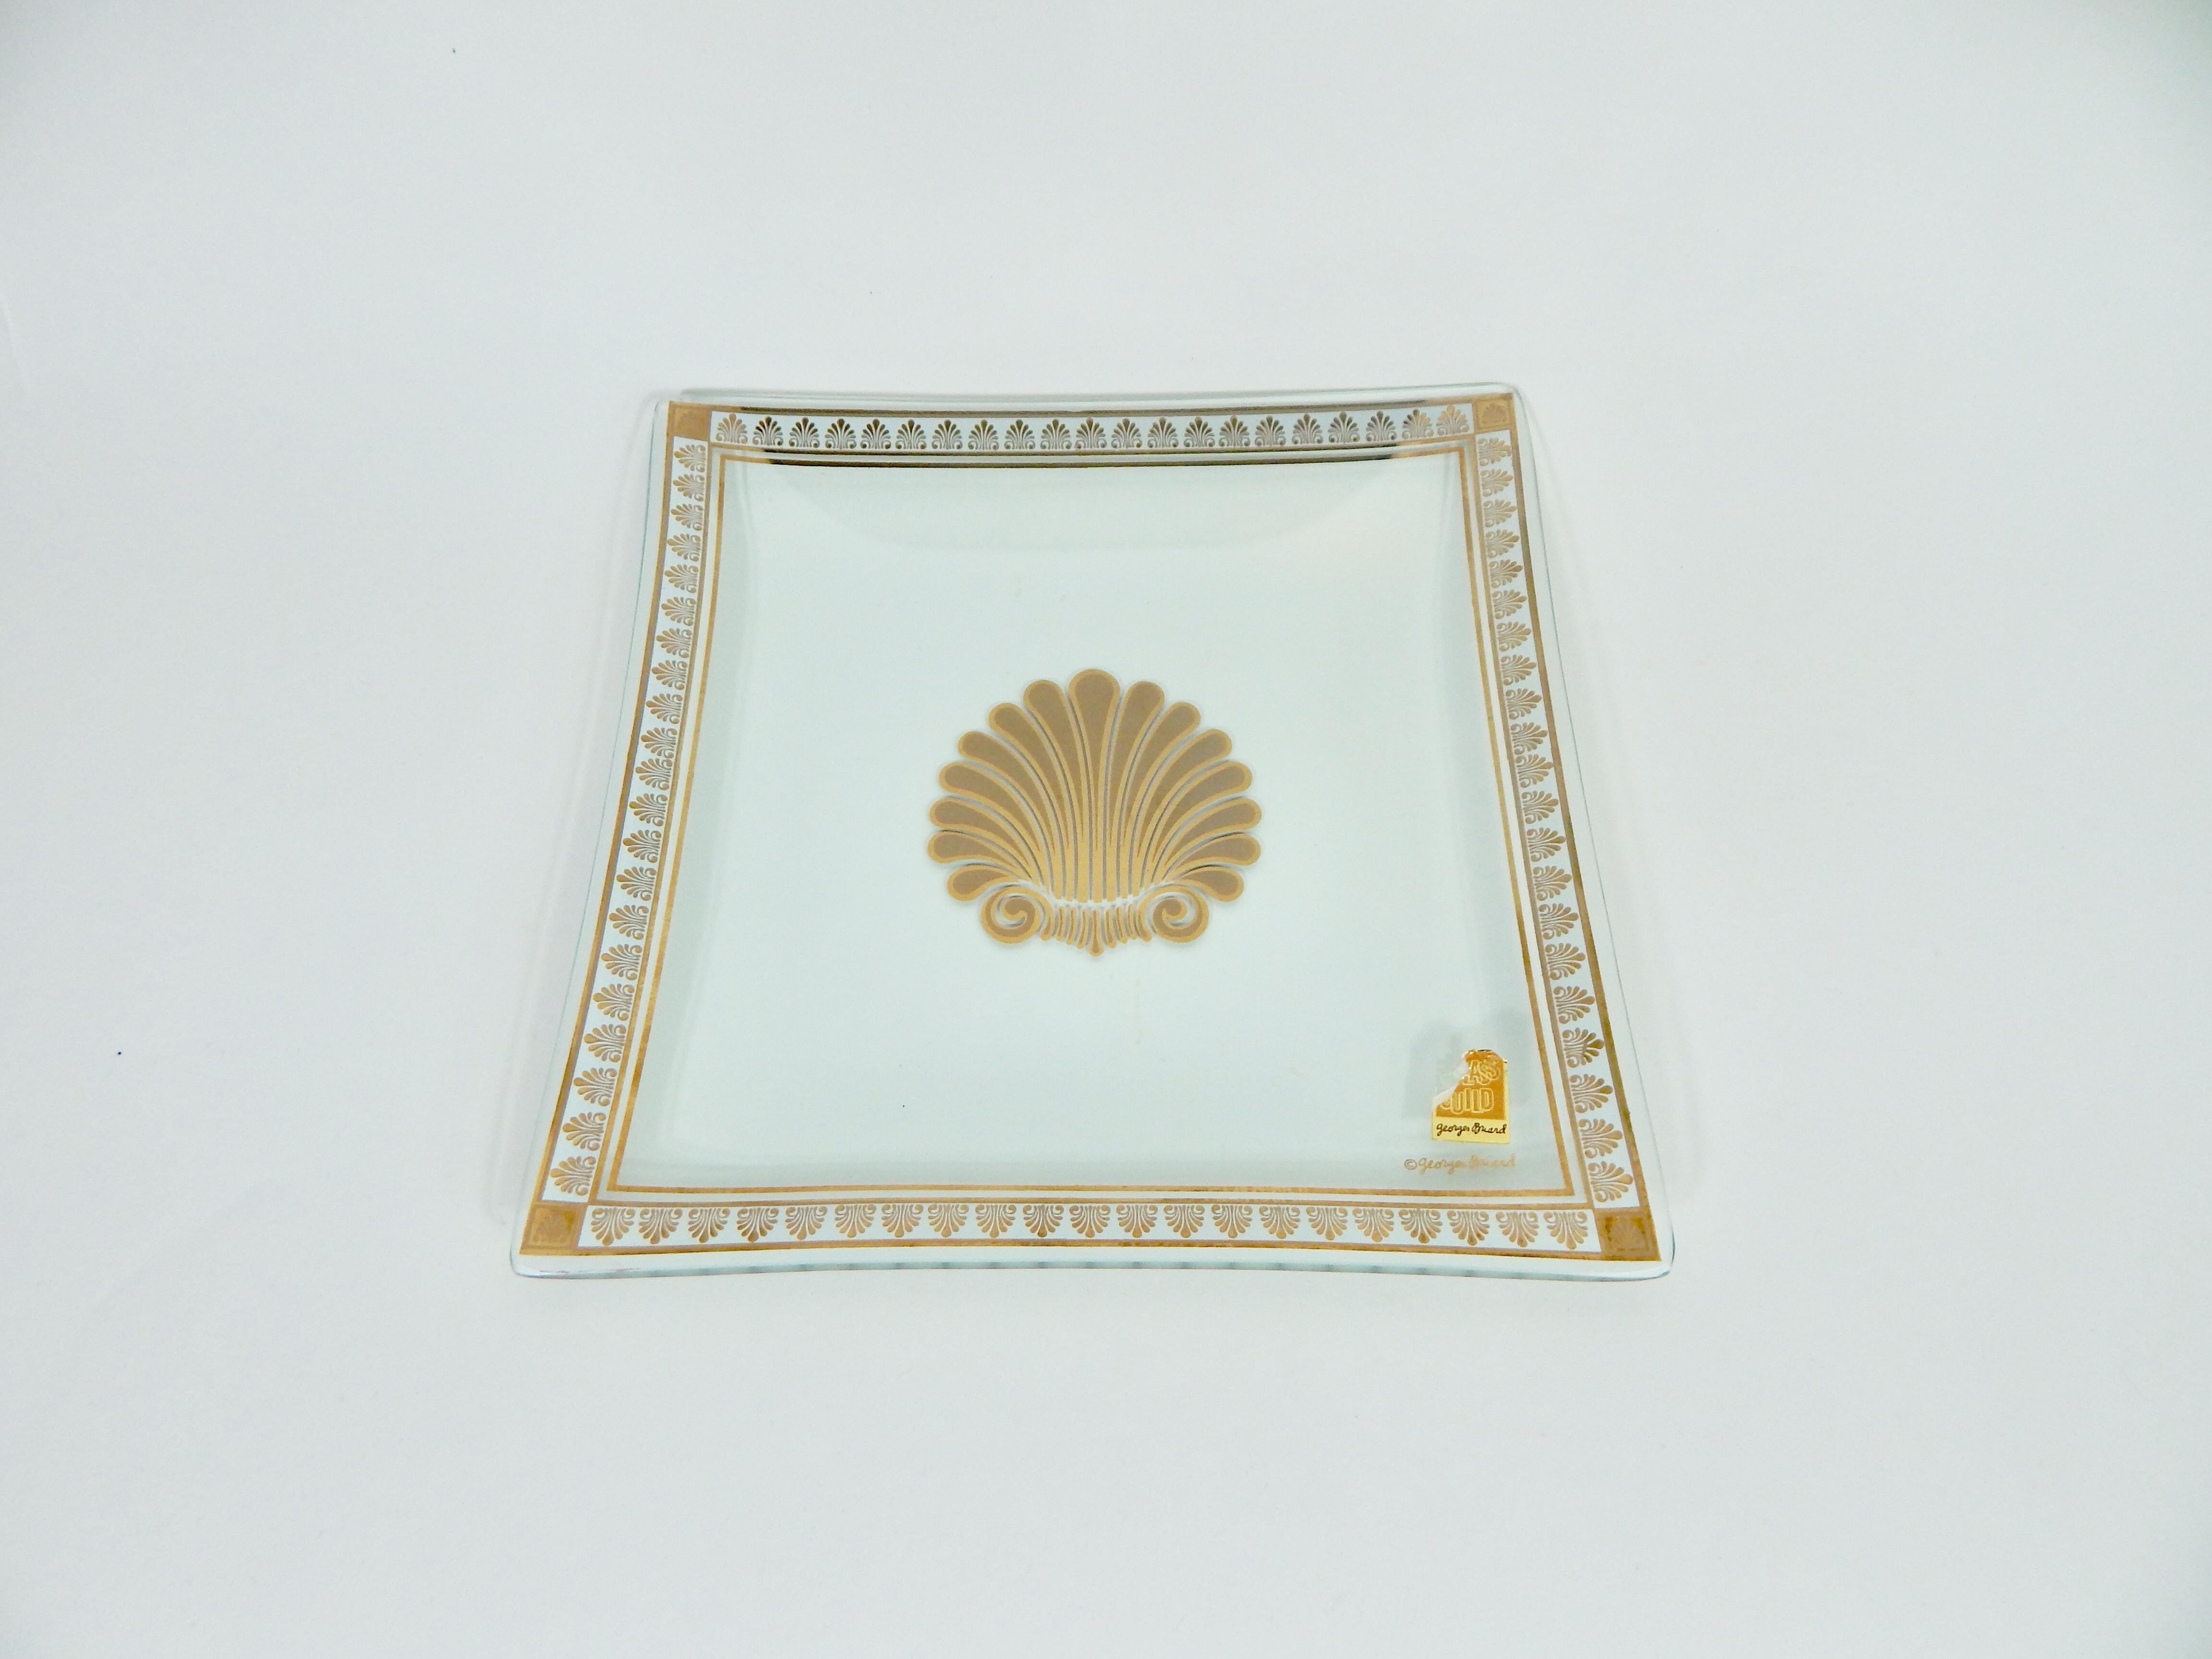 Georges Briard decorative dish or plate. Still retains original tag. Georges Briard signed. Clear glass with gold accents. Excellent condition.